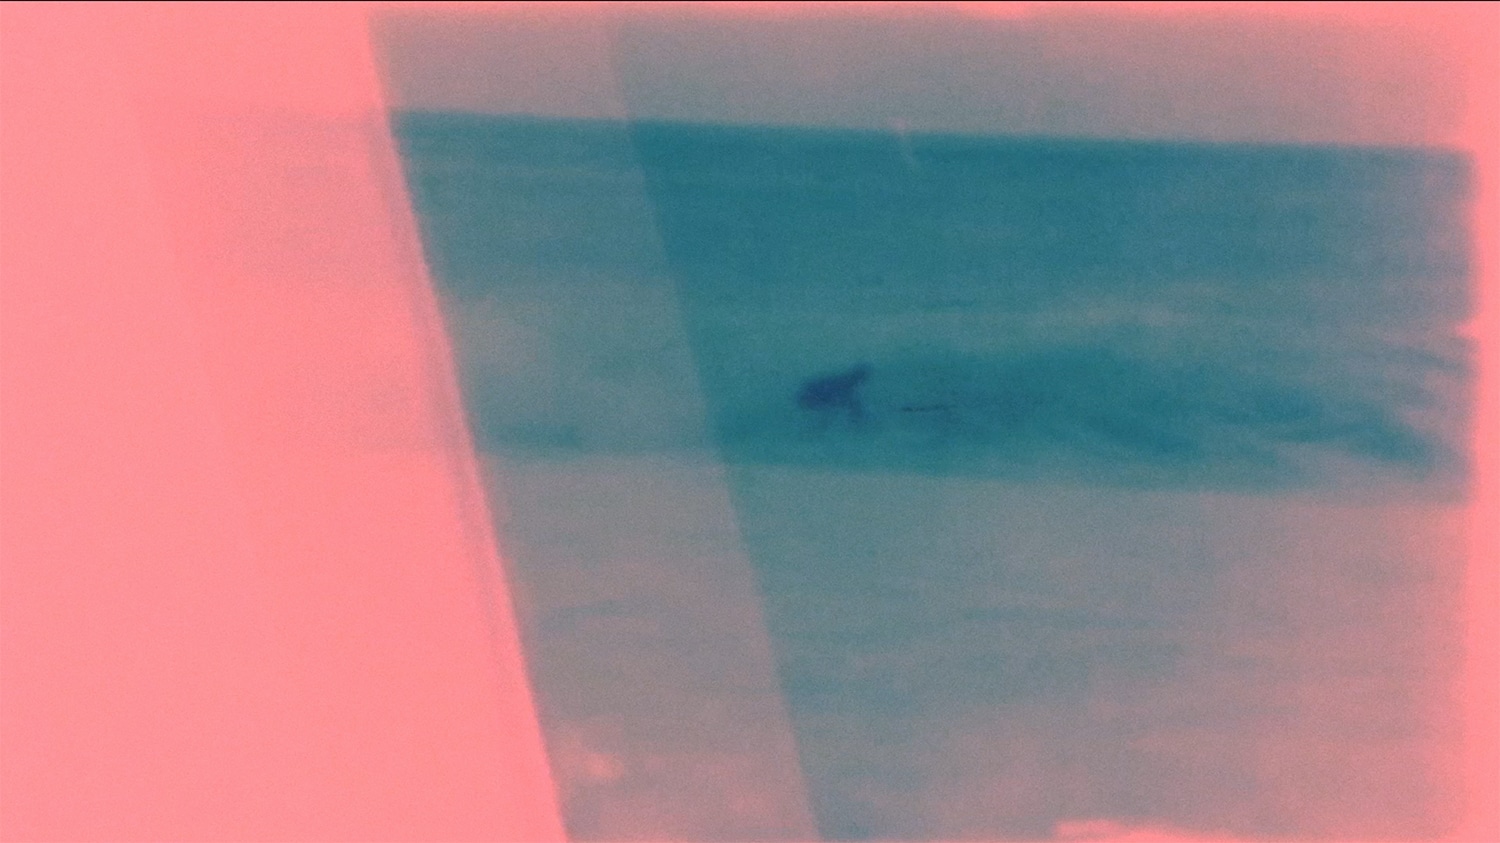 The Shorties entry: Sound on the Shore // A film by CJ Mirra. Shot on super8 capturing sonic highlights & heavy sessions from my perspective...Ft. Noah Lane